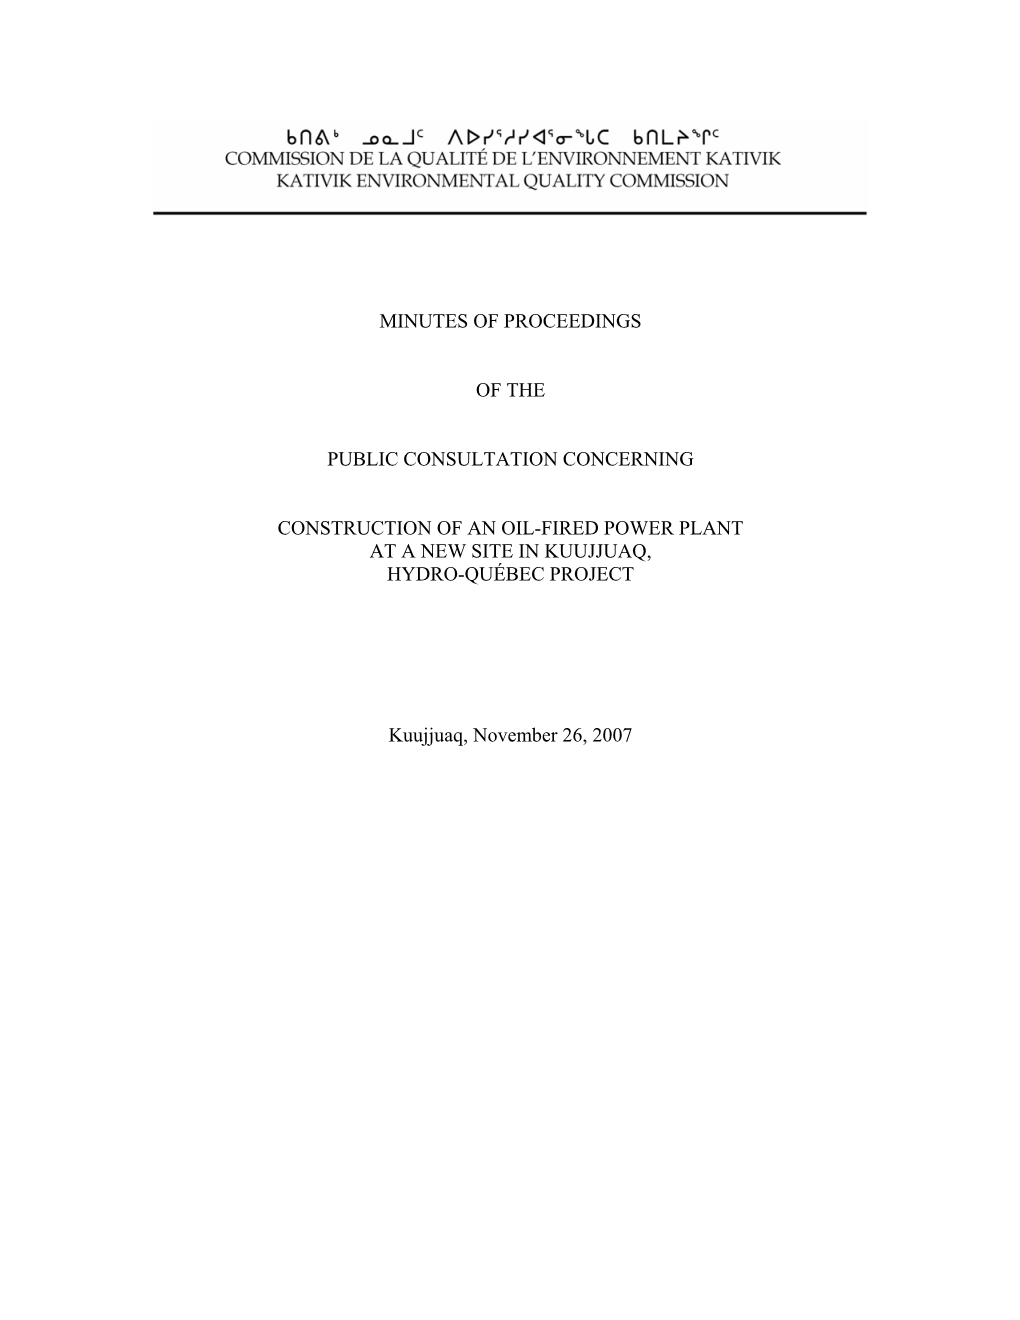 Minutes of Proceedings of the Public Consultation 2 Oil-Fired Power Plant Project in Kuujjuaq by Hydro-Québec KEQC